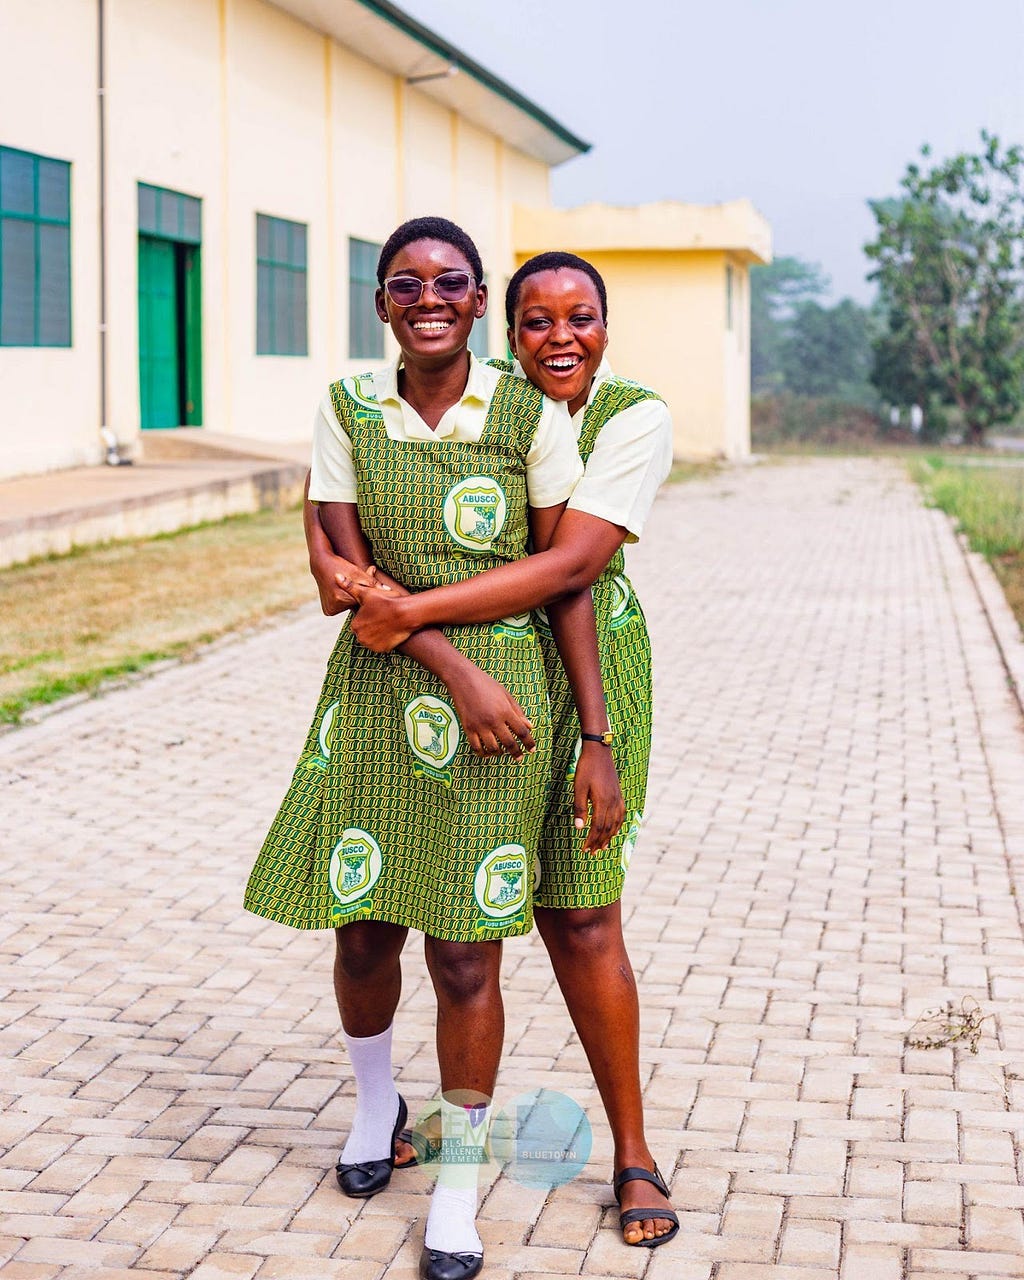 Two students dressed in matching green dresses smile and pose together in an embrace.